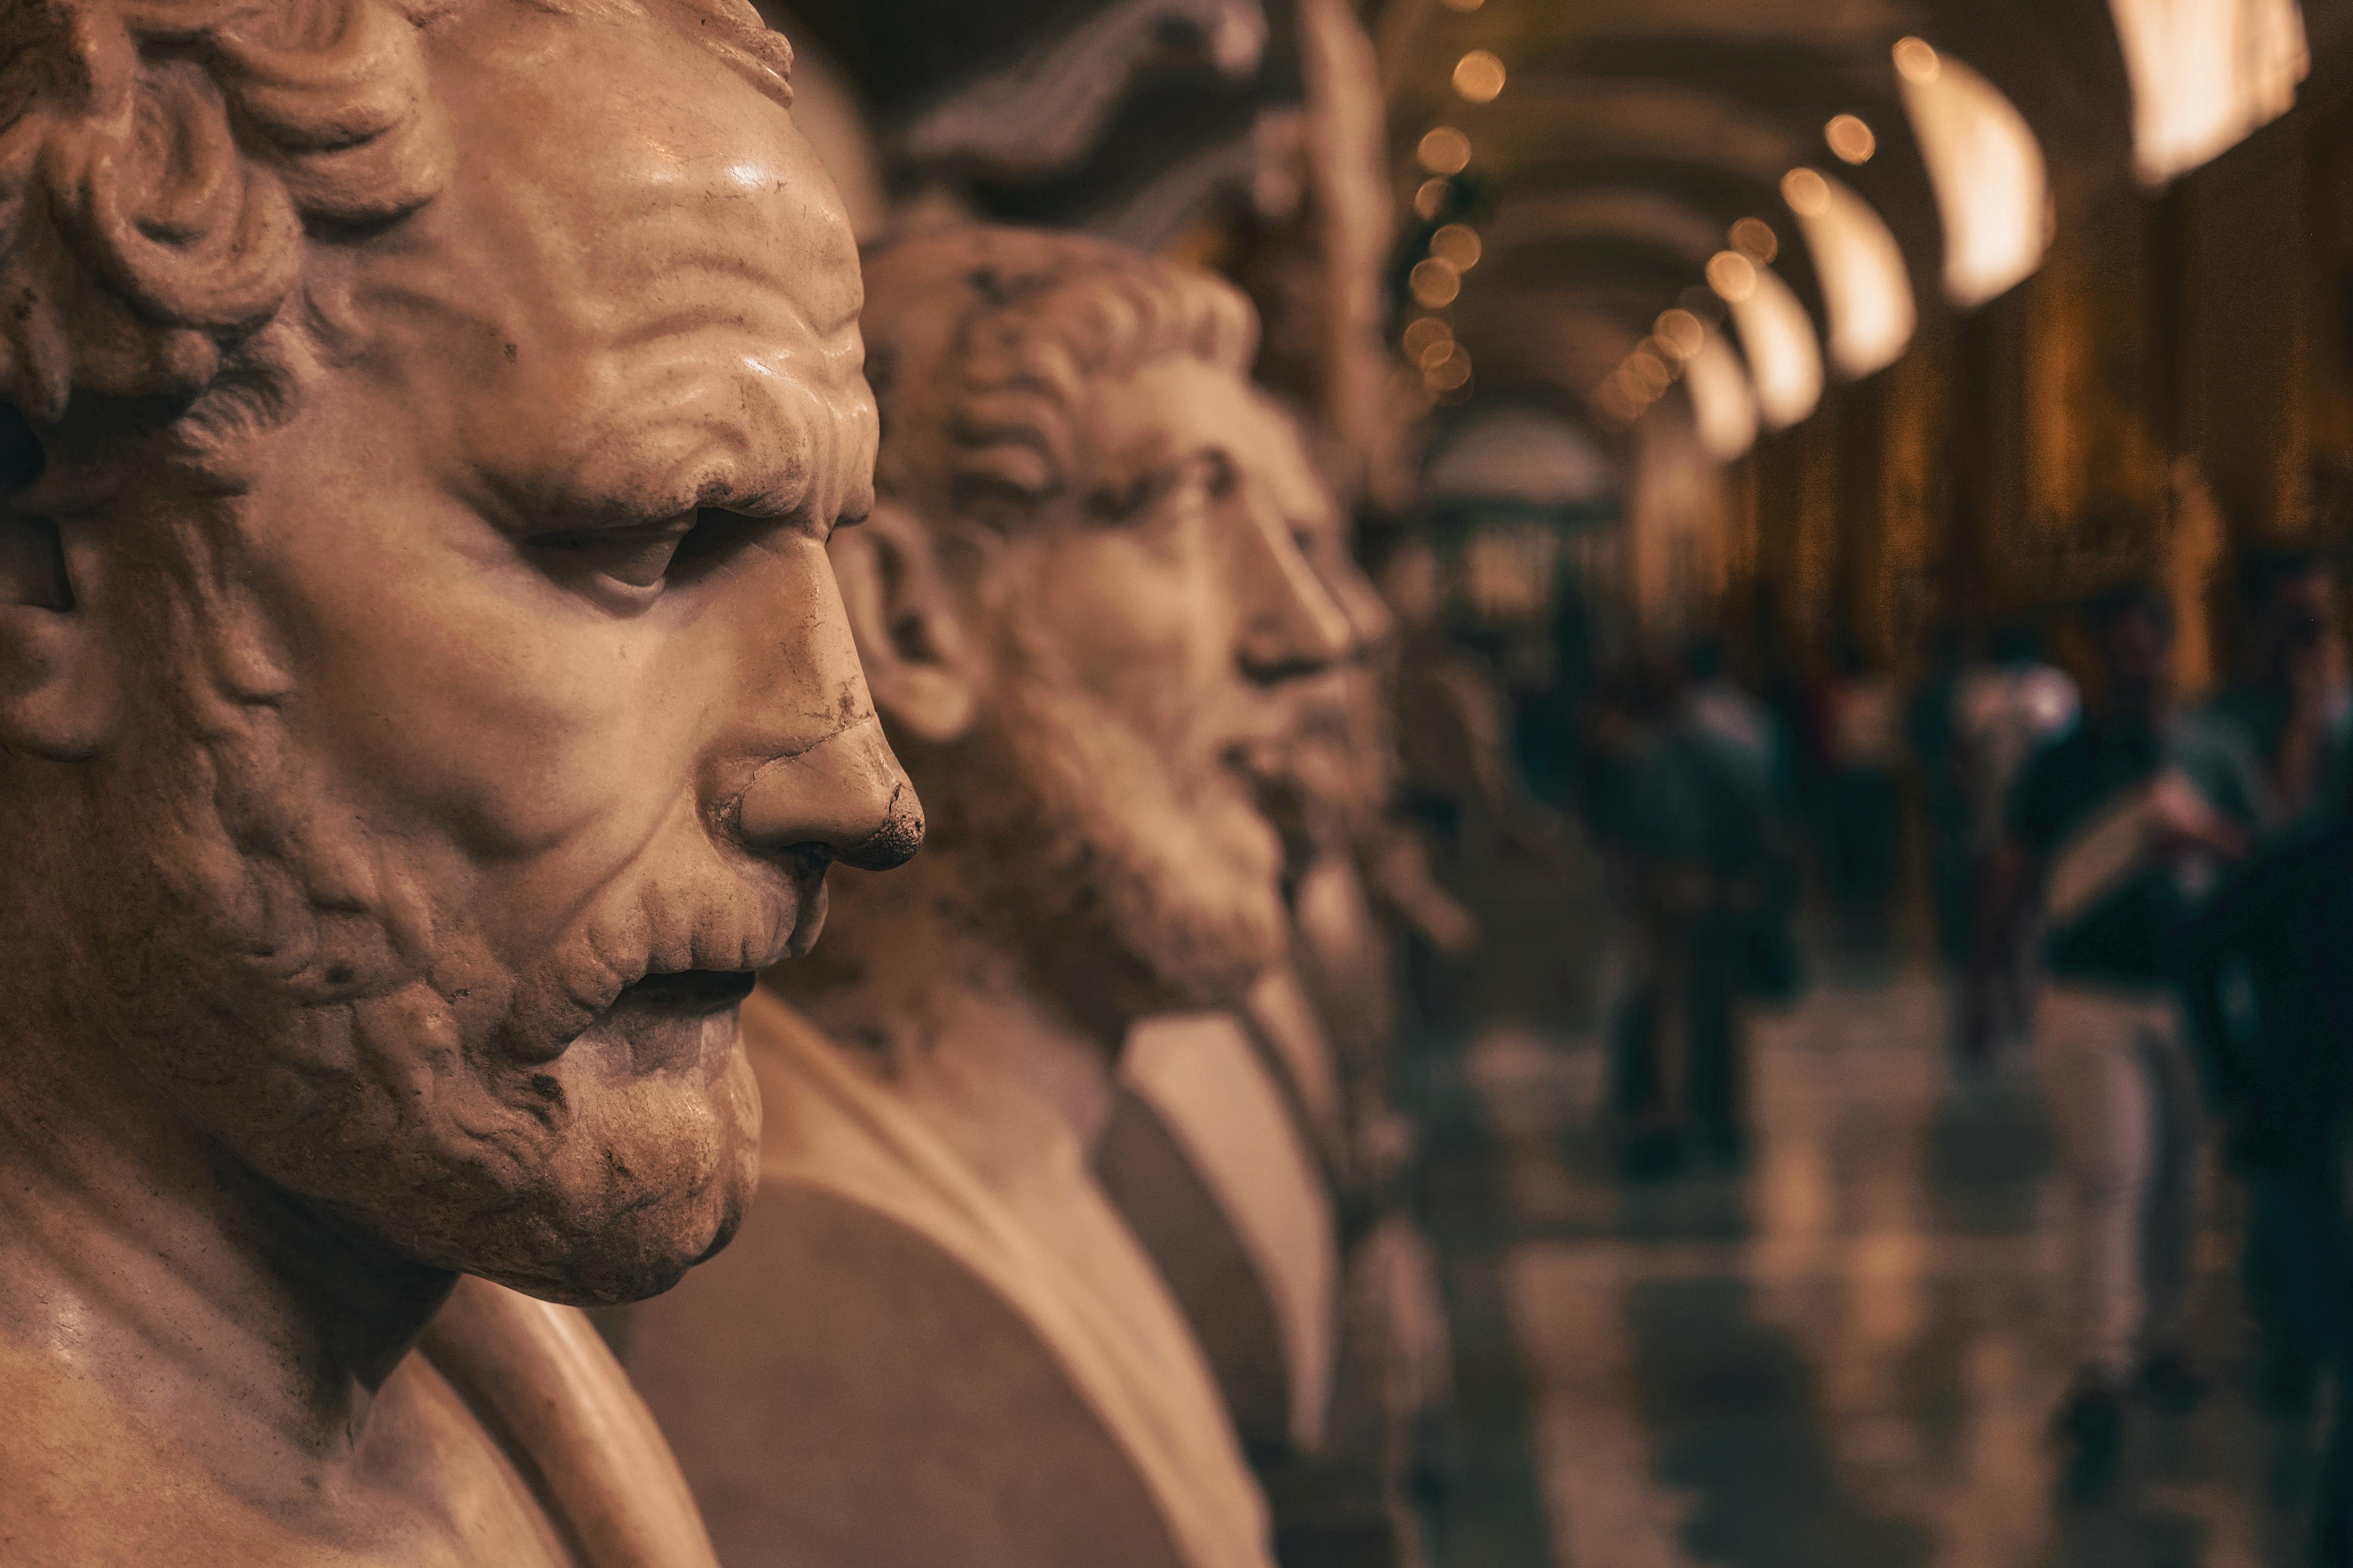 Famous Statues in Vatican Museums